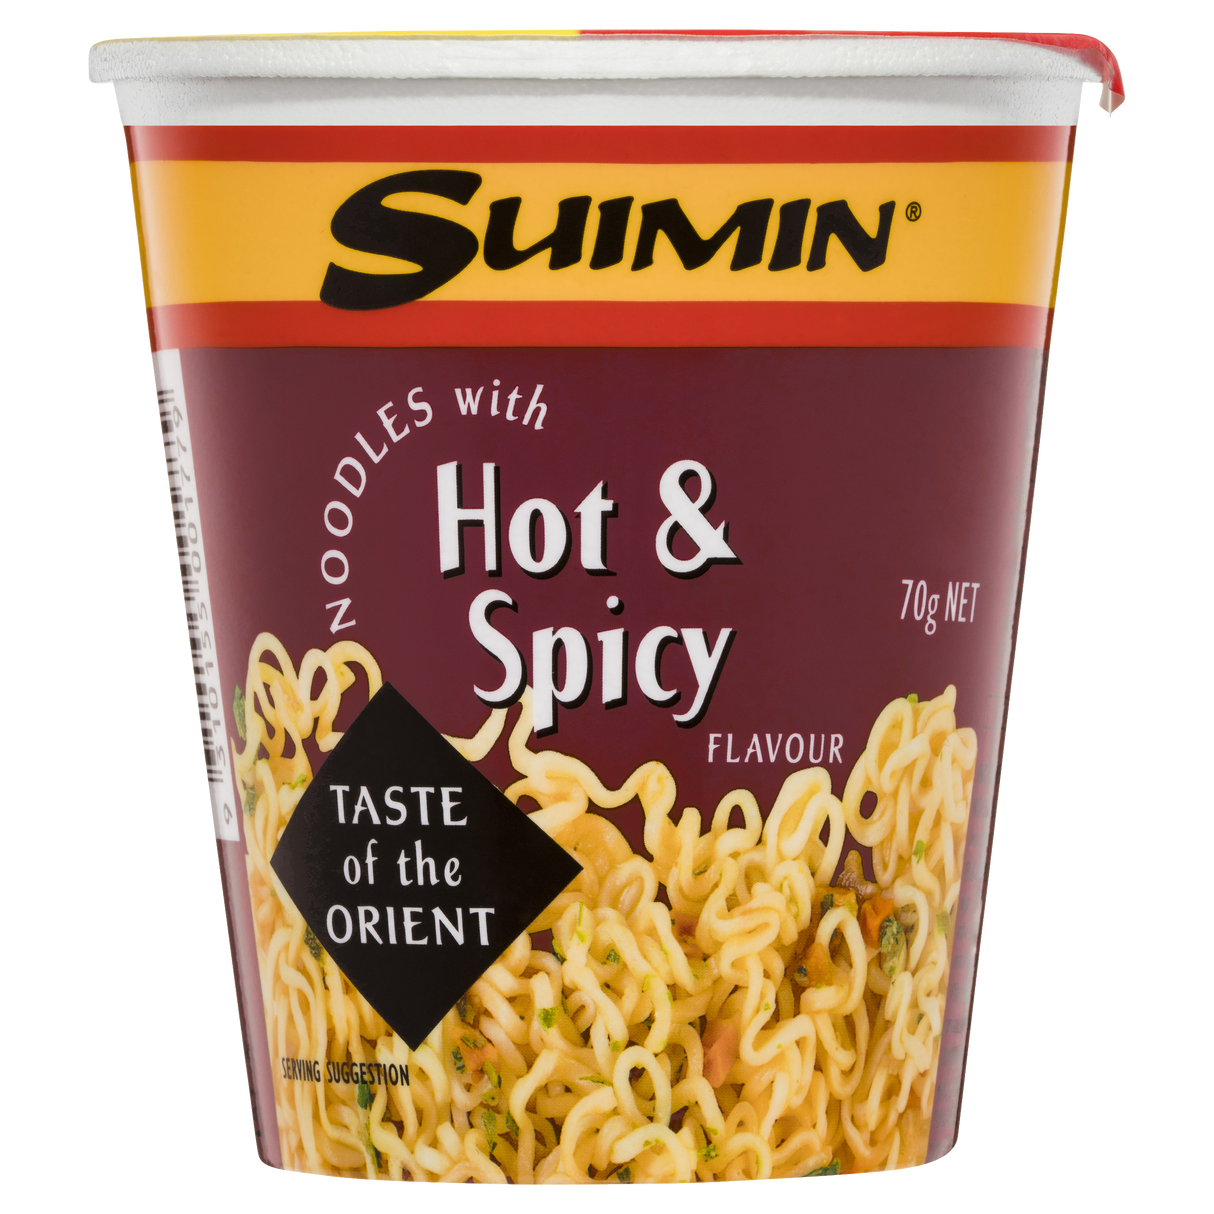 Suimin Noodle Cup Hot & Spicy 70g